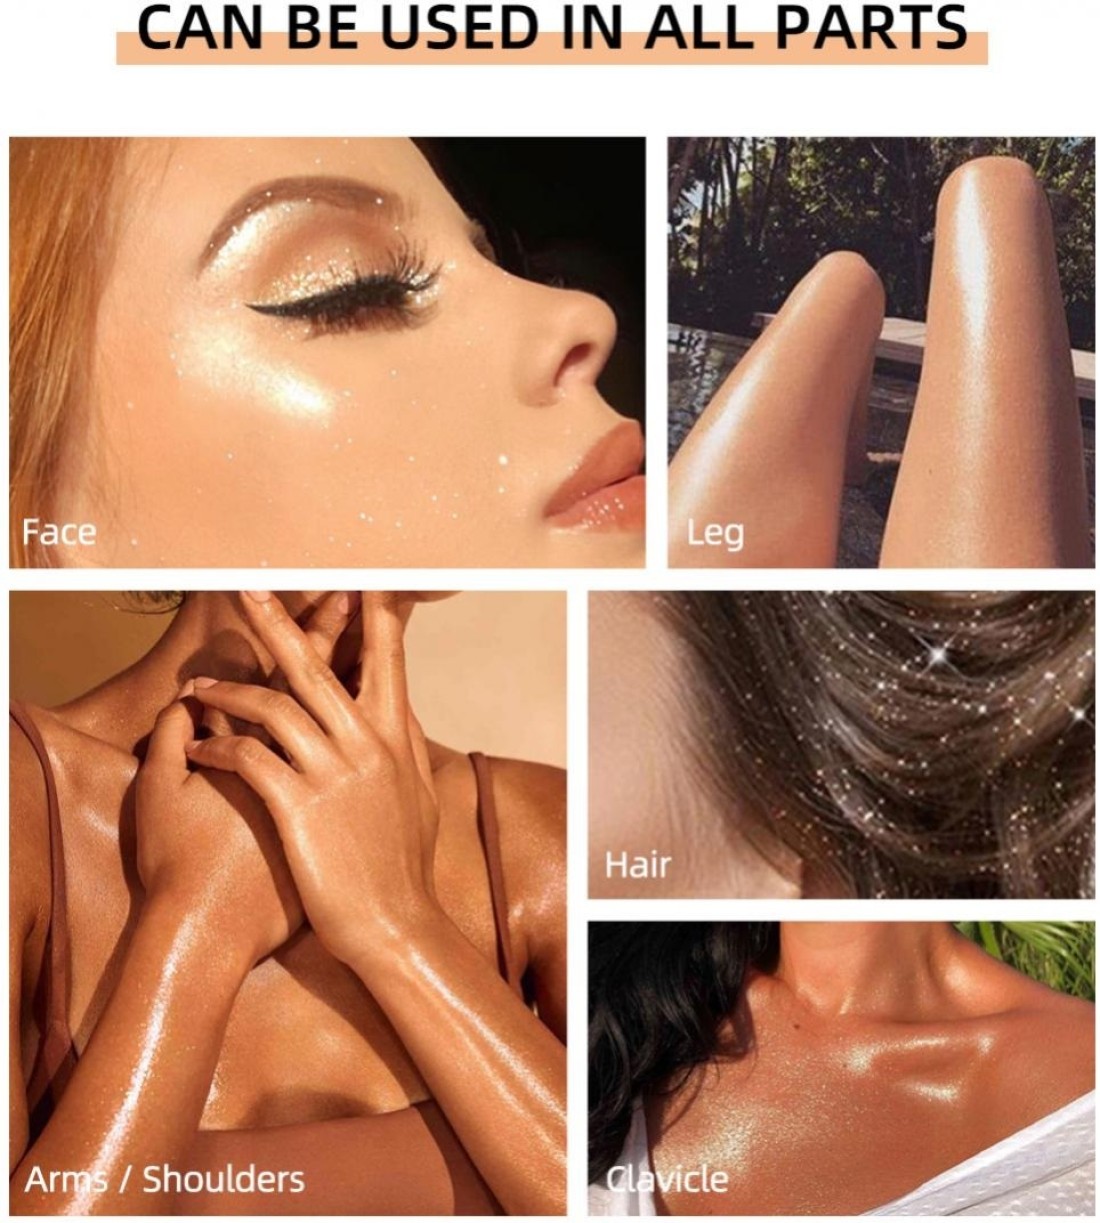 MYEONG NEW LONG LASTING GOLD GLITTER HIGHLIGHTER FOR ALL SKIN - Price in  India, Buy MYEONG NEW LONG LASTING GOLD GLITTER HIGHLIGHTER FOR ALL SKIN  Online In India, Reviews, Ratings & Features